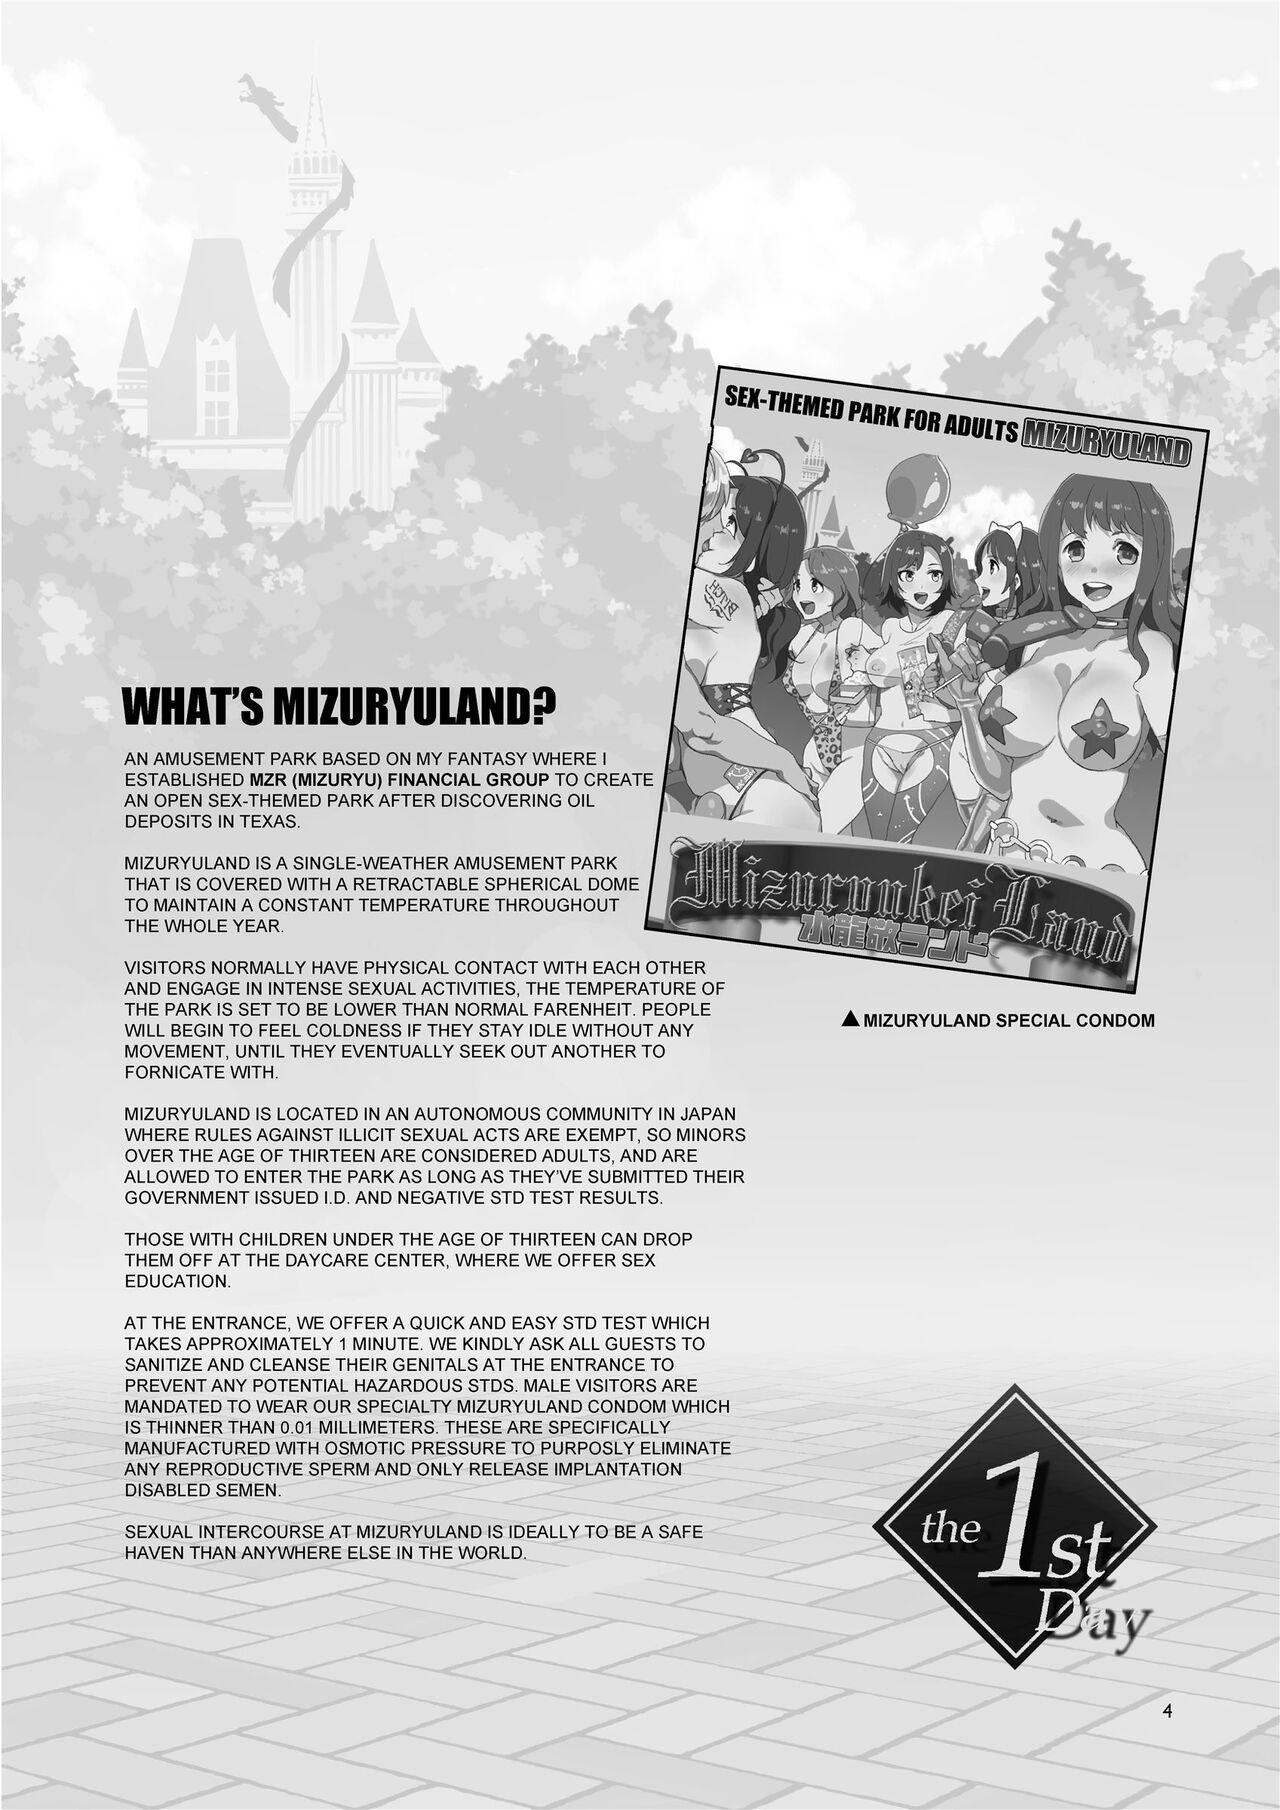 Gay Pov Welcome to MizuryuLand! The 1st Day Student - Page 4